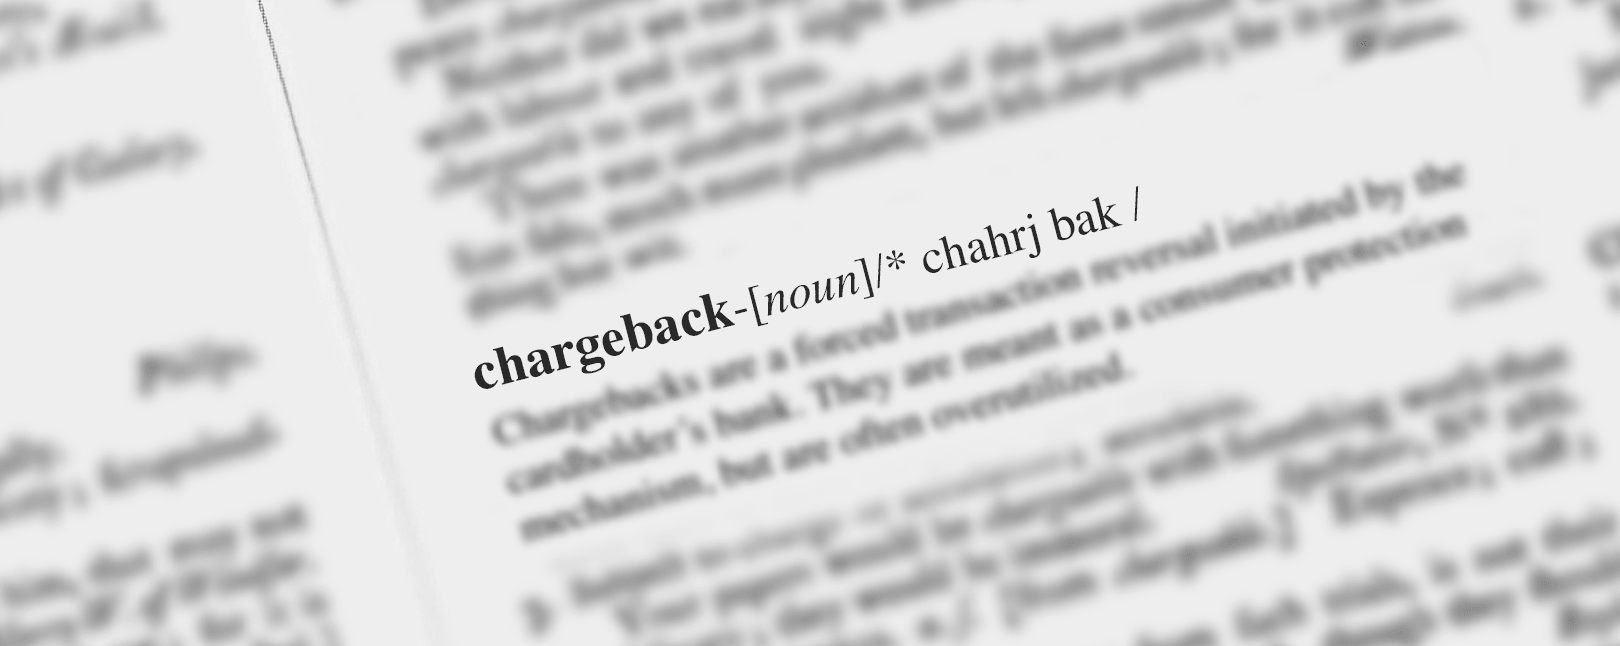 chargeback definition